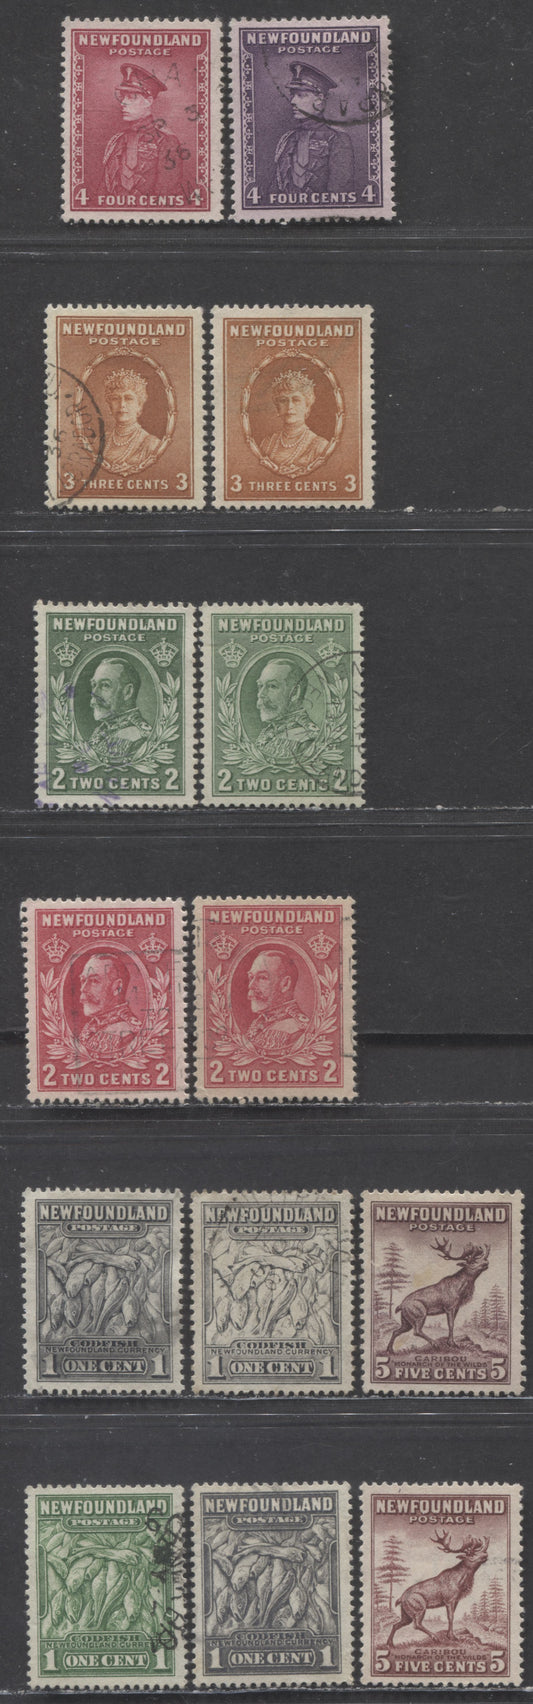 Lot 81 Newfoundland #183-190 1c-5c Green/Violet Brown Codfish/Caribou, 1932-1937 Perkins Bacon Definitives, 14 Very Fine Used Singles Includes Extra Shades Of 5c & Die 2